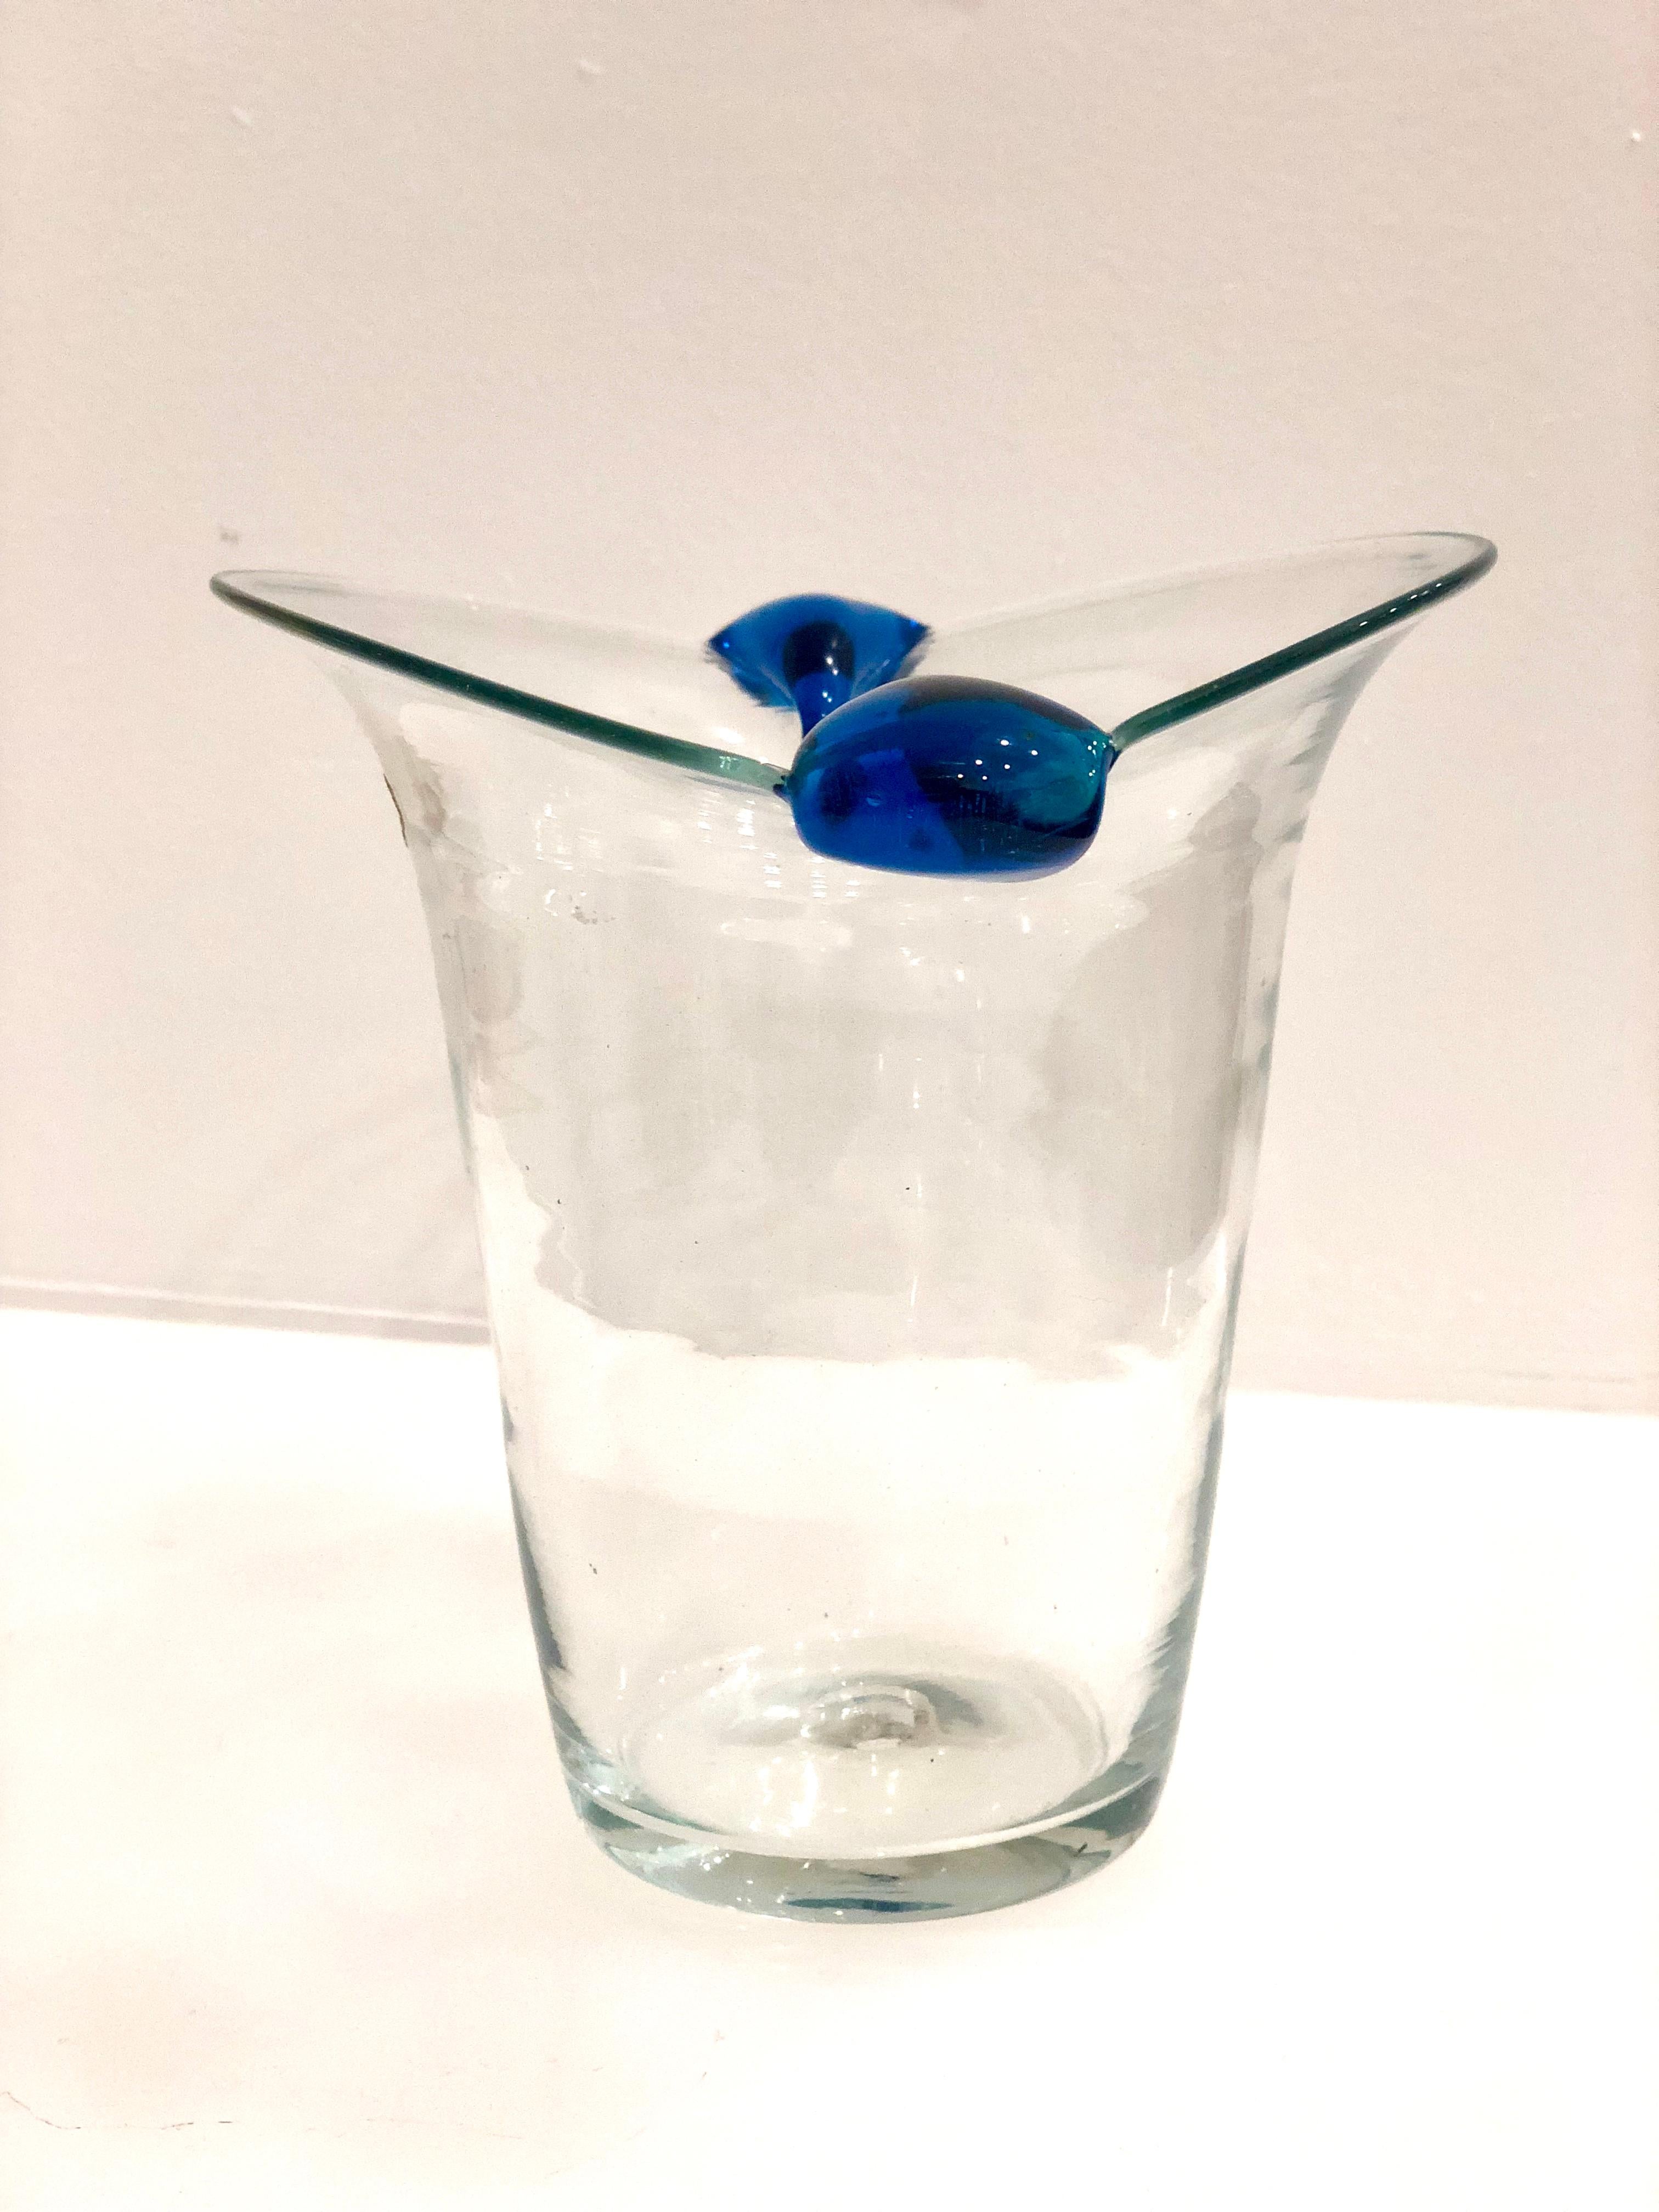 A beautiful 1960s handcrafted glass vase by Blenko. Has a clear finish with blue accents. In excellent condition, no chips or cracks. A very collectible and rare piece. Made by an American company.